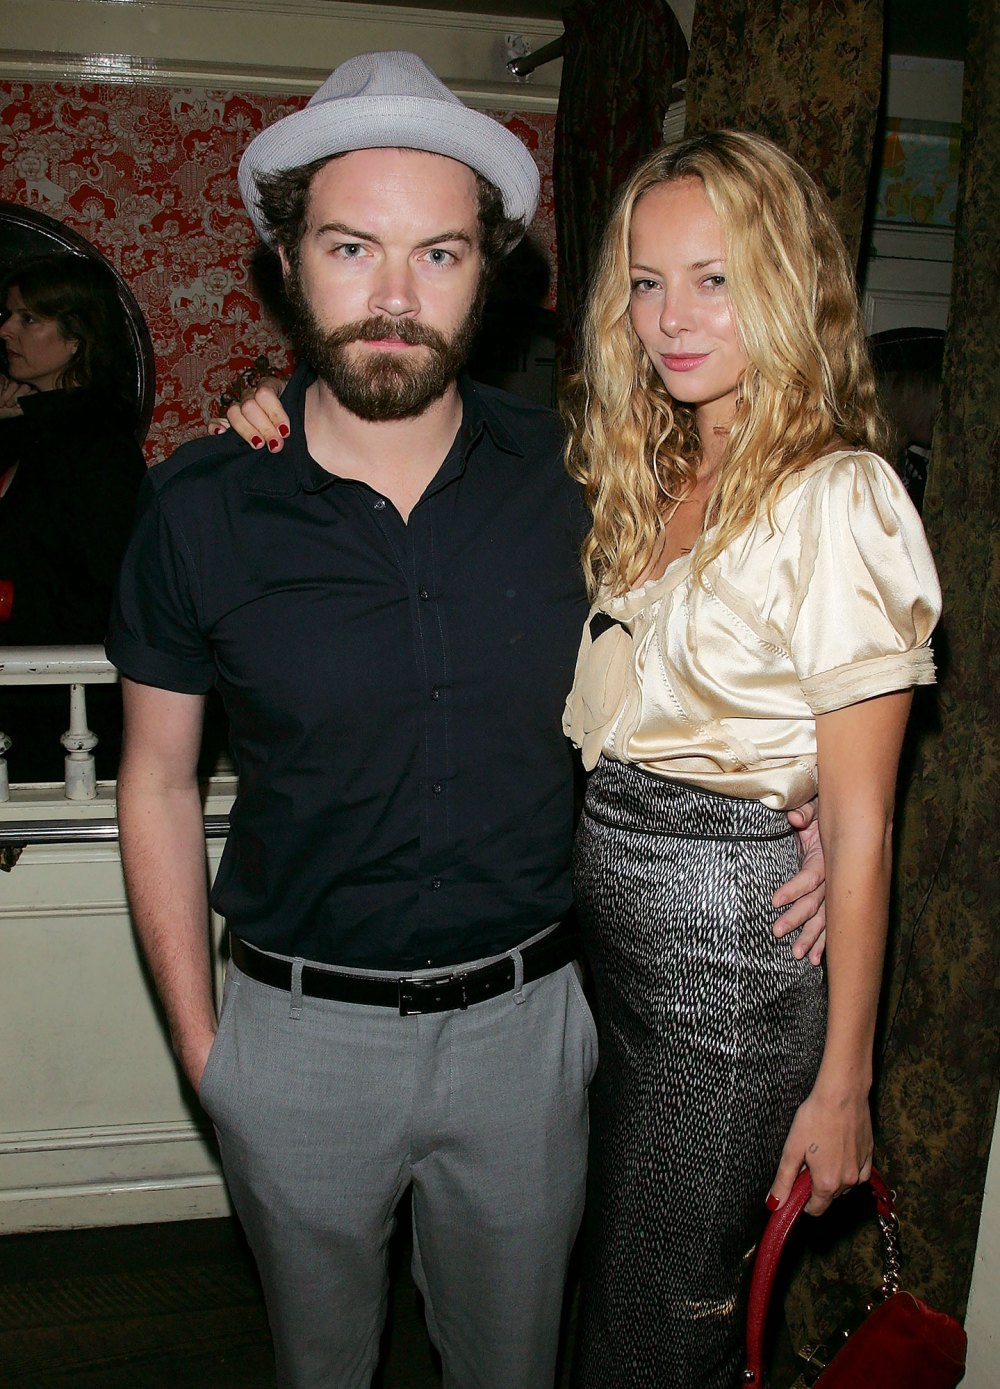 Bijou Phillips Spotted Without Wedding Ring Days After Filing for Divorce From Danny Masterson 2